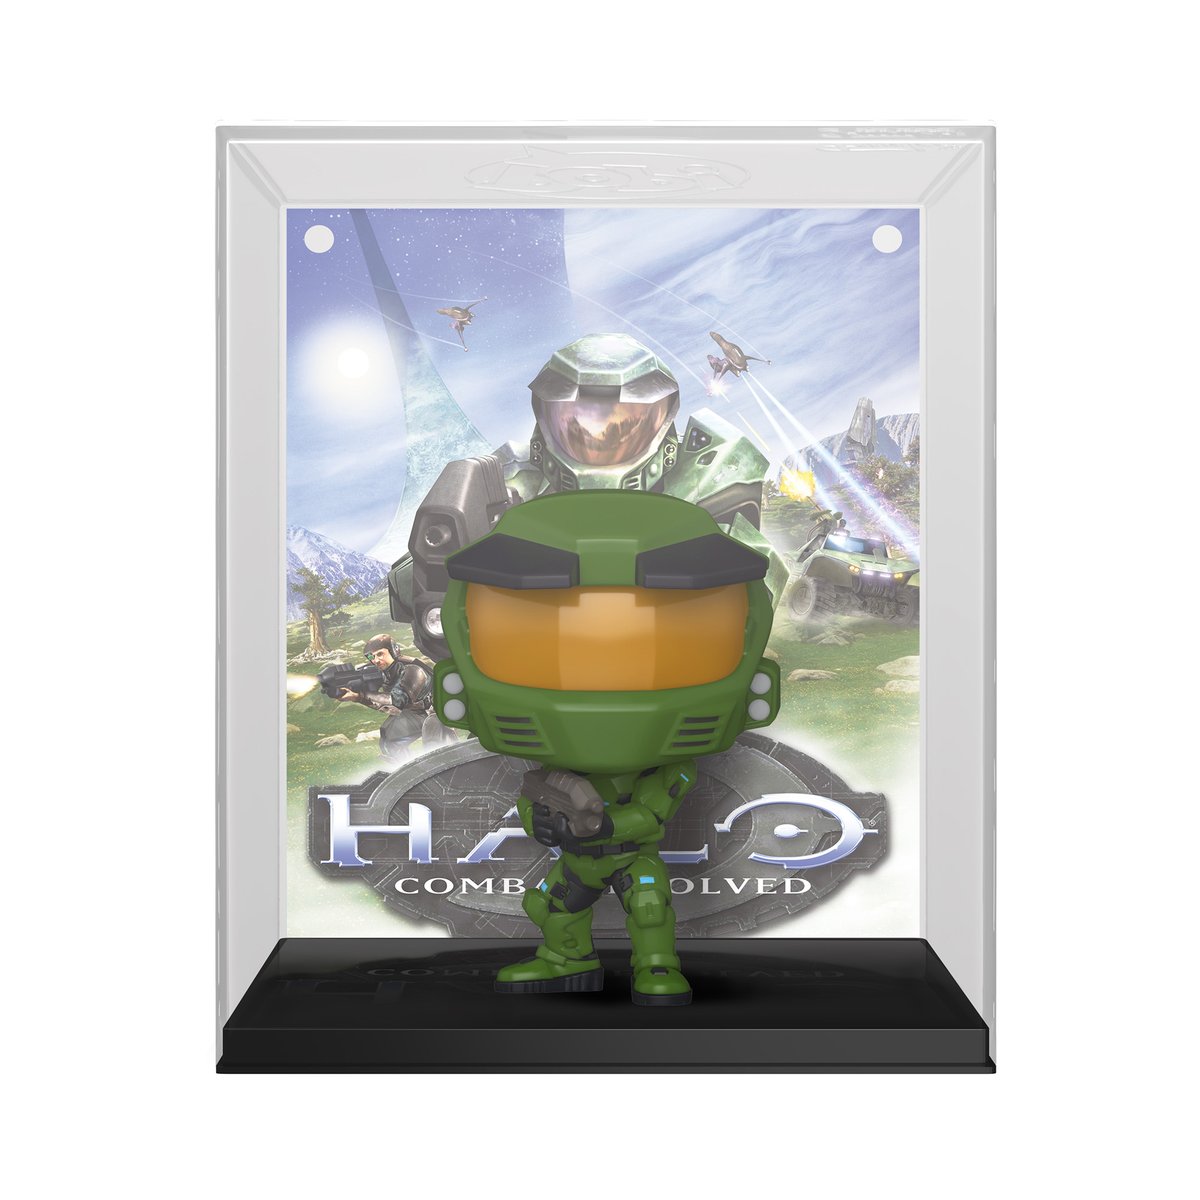 RT and follow @OriginalFunko for the chance to WIN the @GameStop exclusive Halo: Master Chief POP! Game Cover! Not feeling lucky? Order now: bit.ly/35JQQUn #Funko #FunkoPOP #Giveaway #Halo @HCS